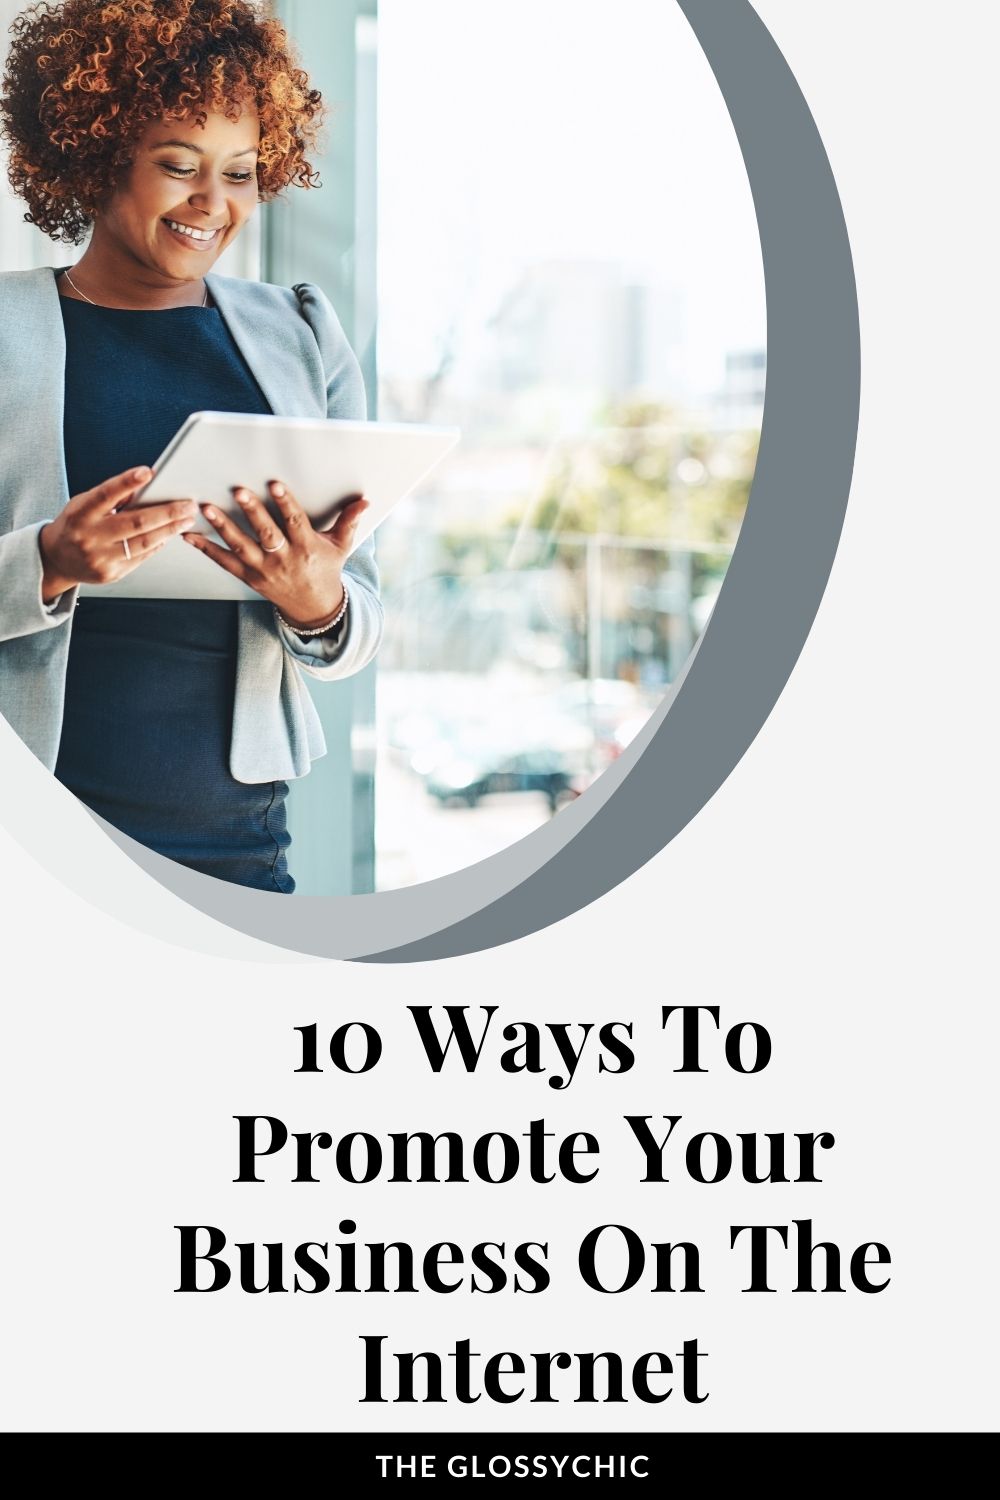 The Best And The Most Effective Methods To Promote Your Business On The Internet